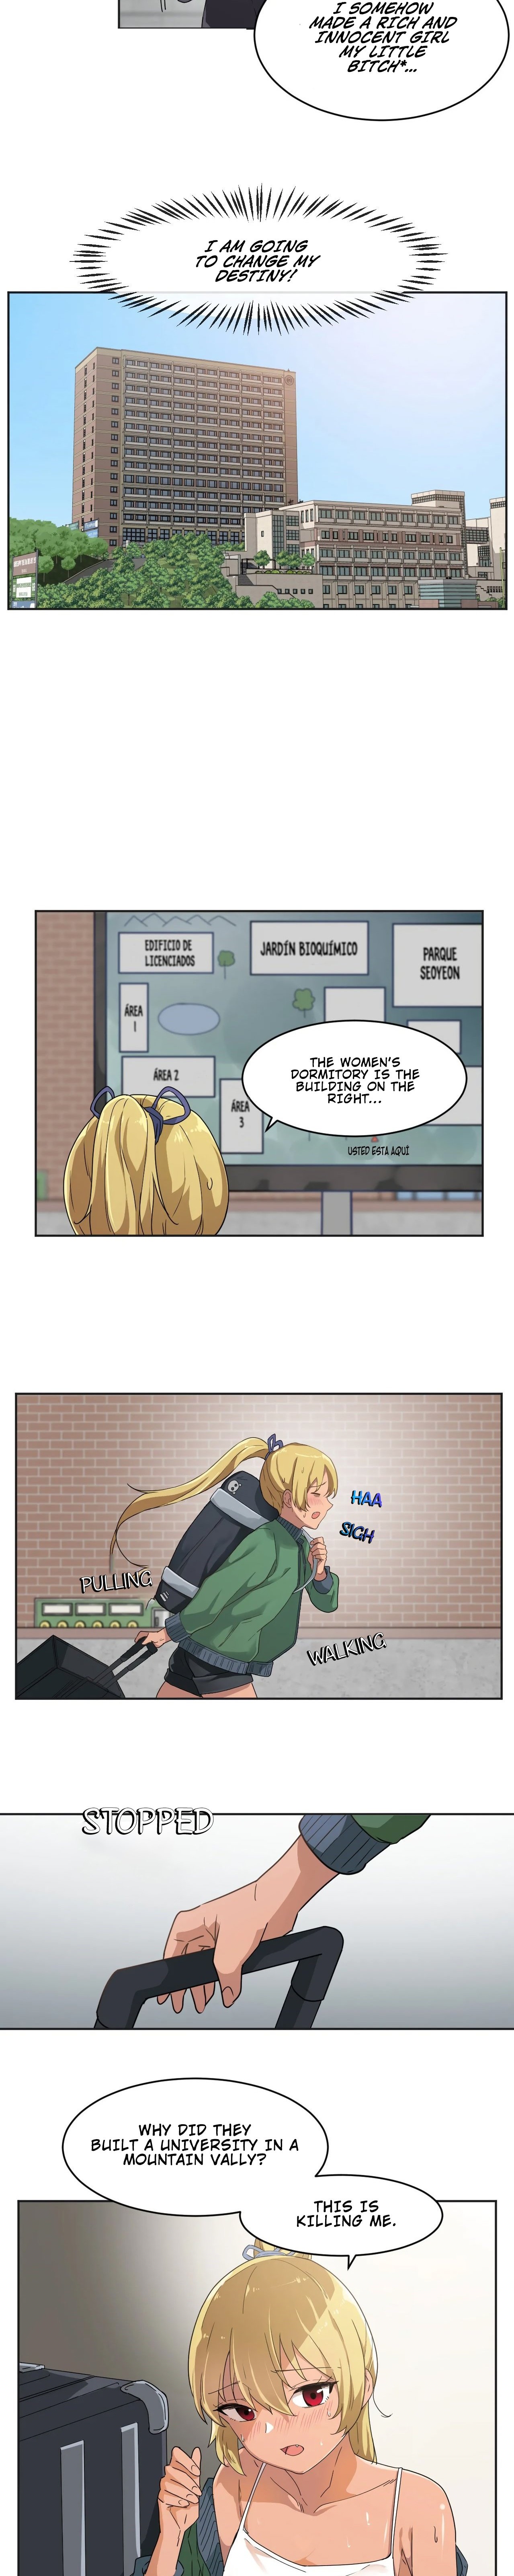 Heart Stealer Chapter 3 - Page 15